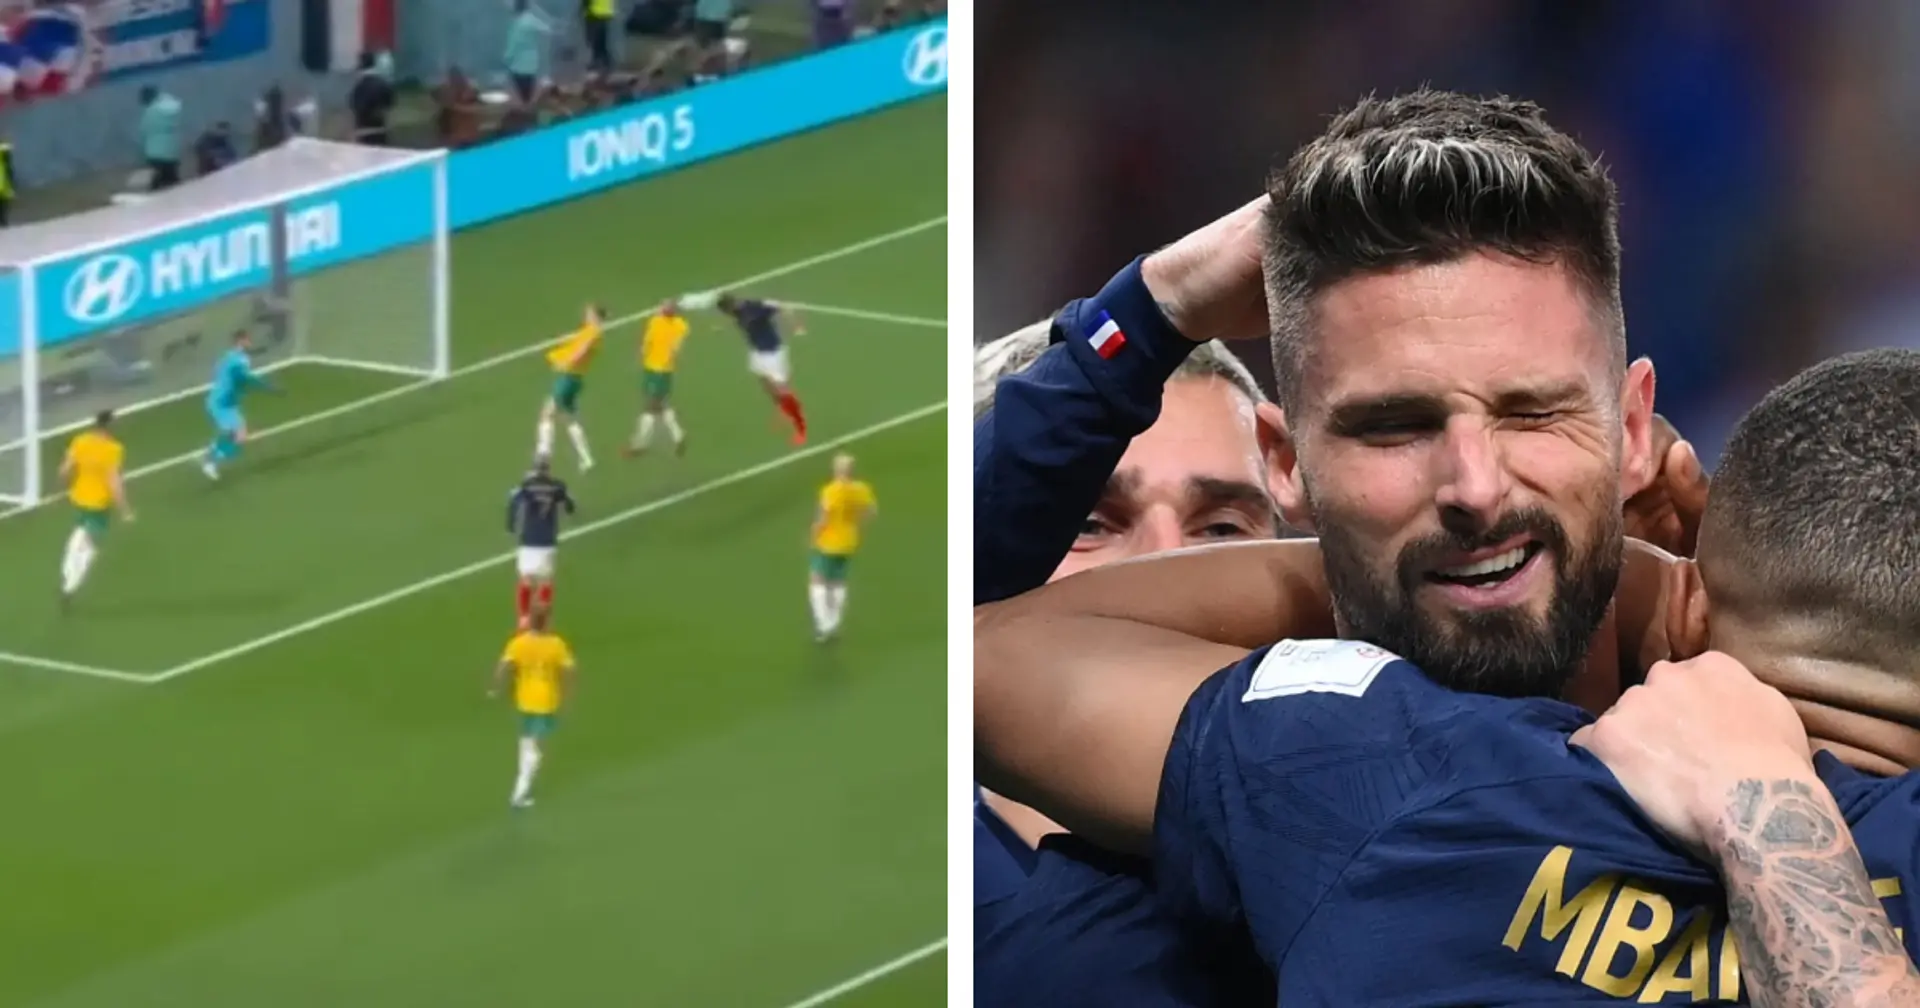 'We gave up this man for Lakaka': Giroud one goal away from being France top scorer, likes of Zidane and Platini behind